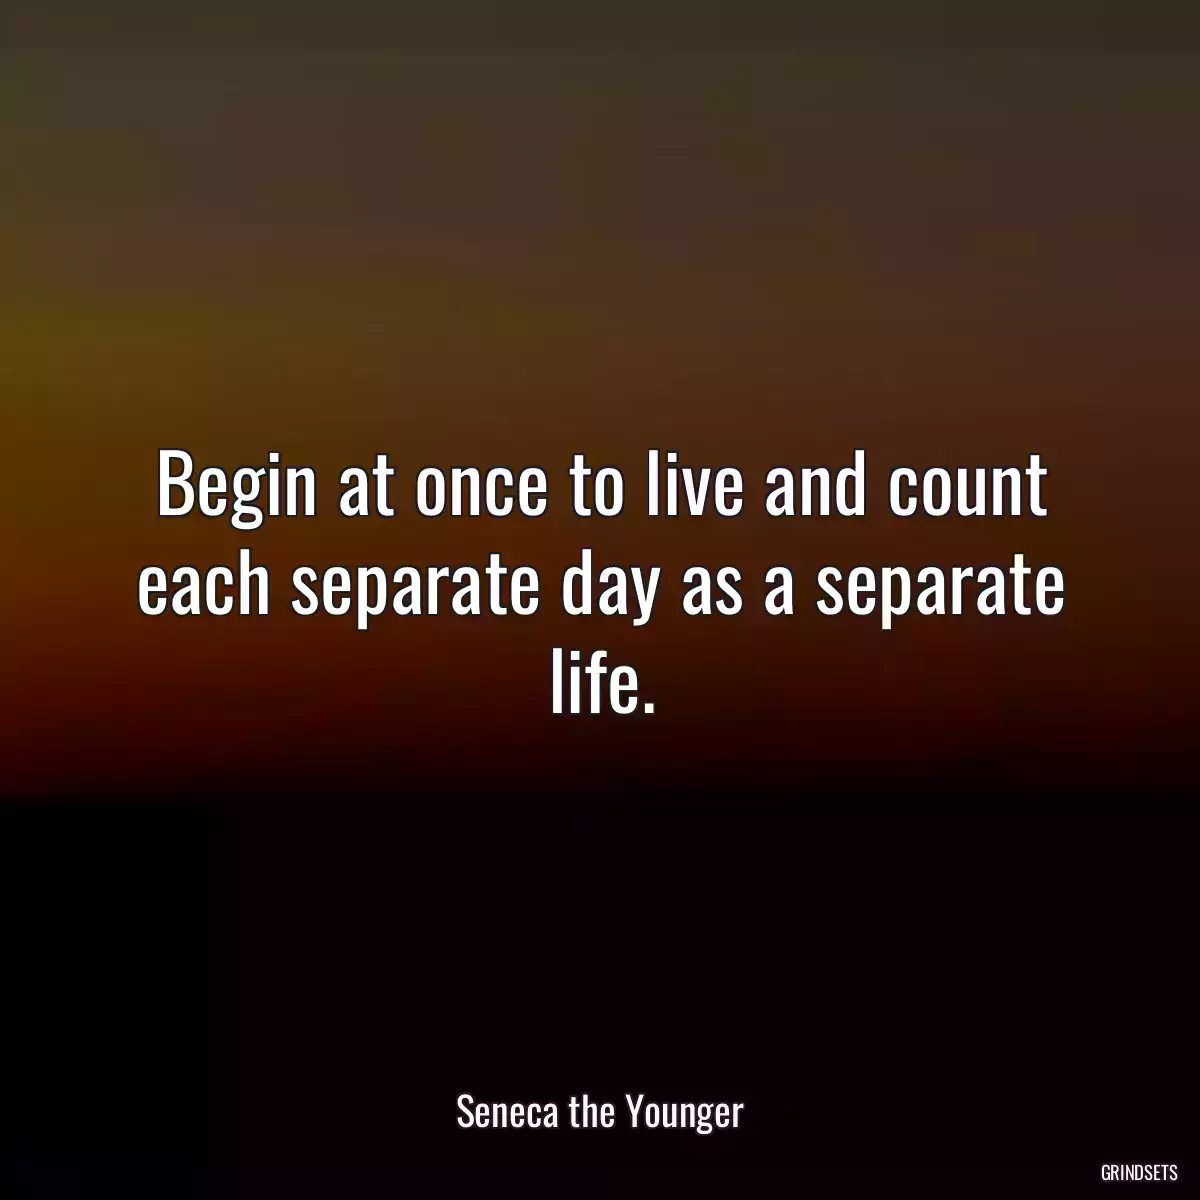 Begin at once to live and count each separate day as a separate life.